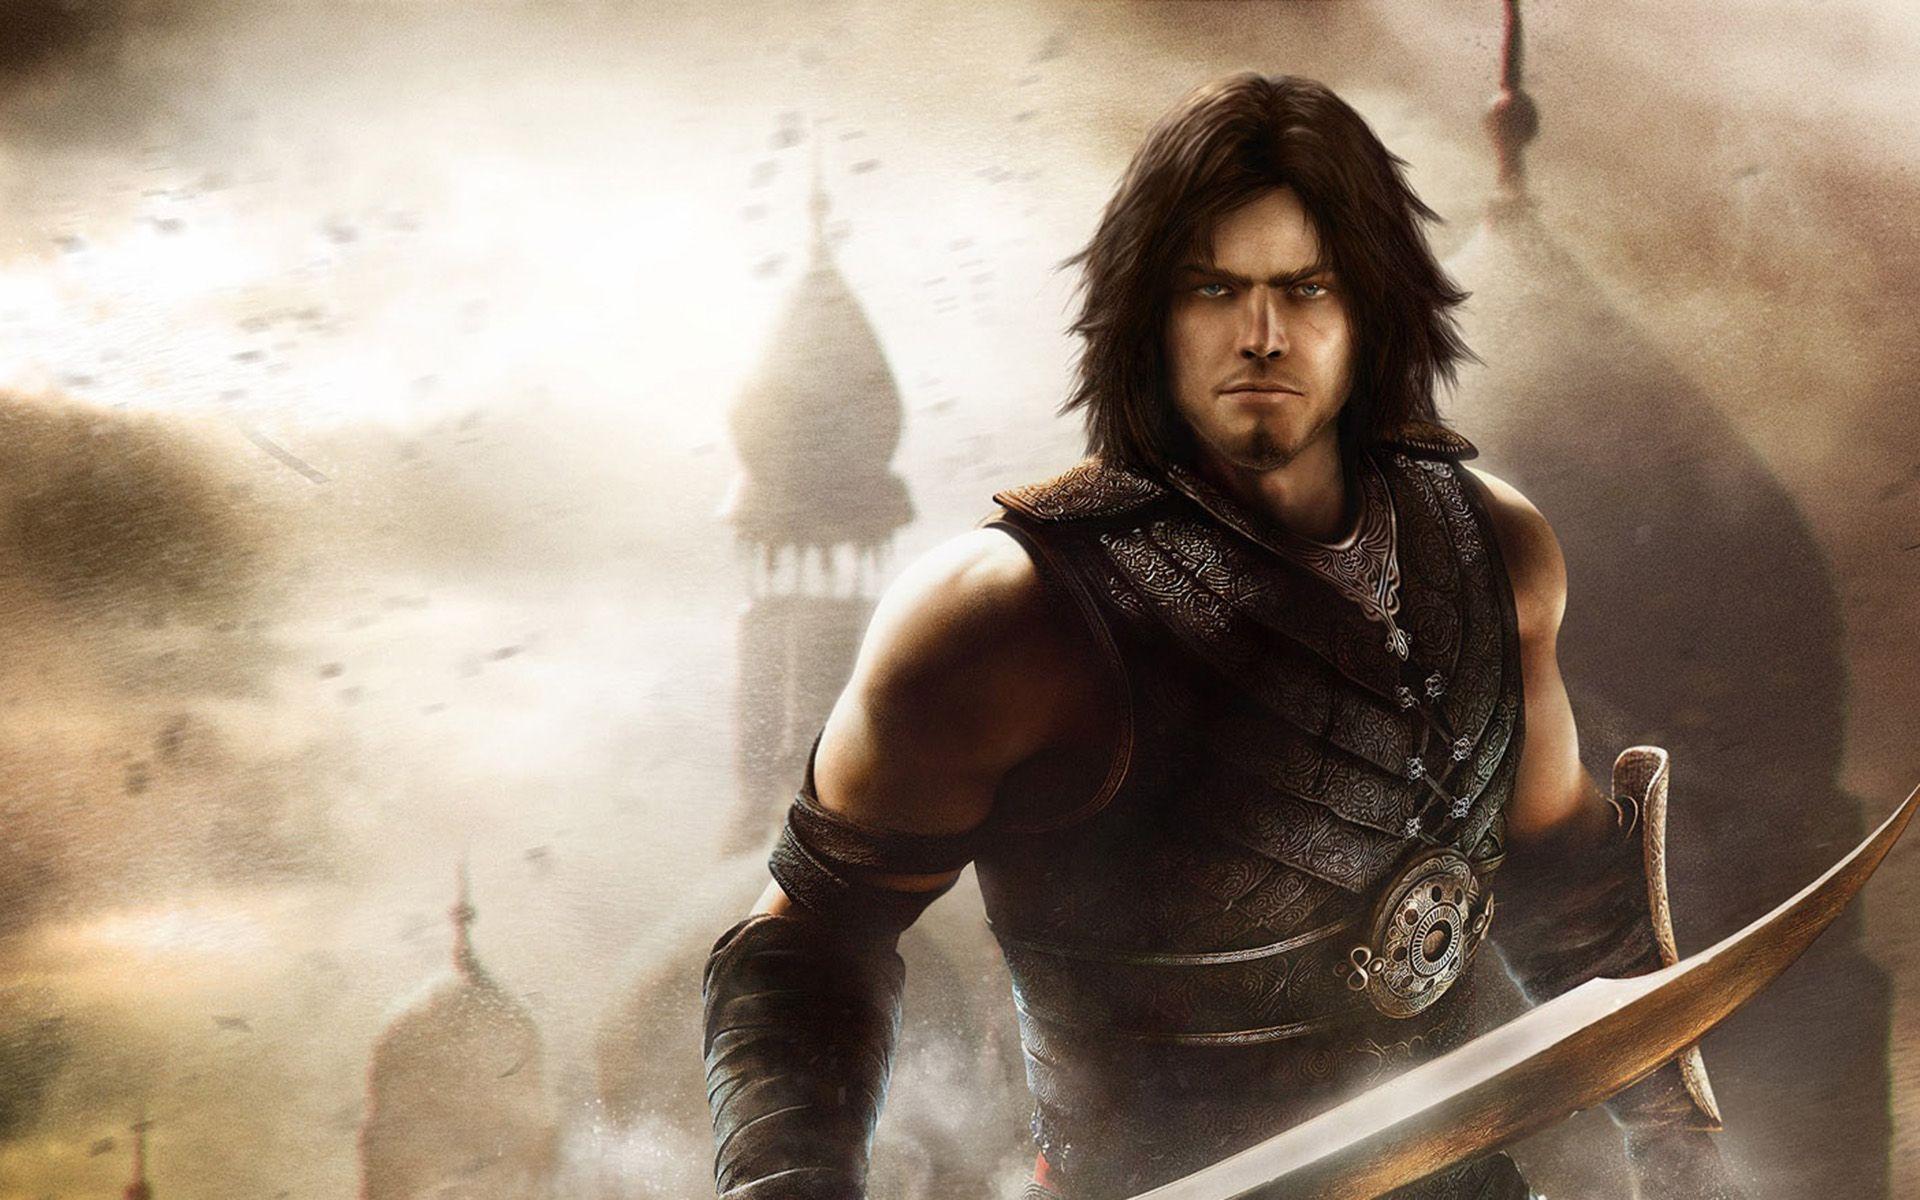 Prince Of Persia The Forgotten Sands wallpaper